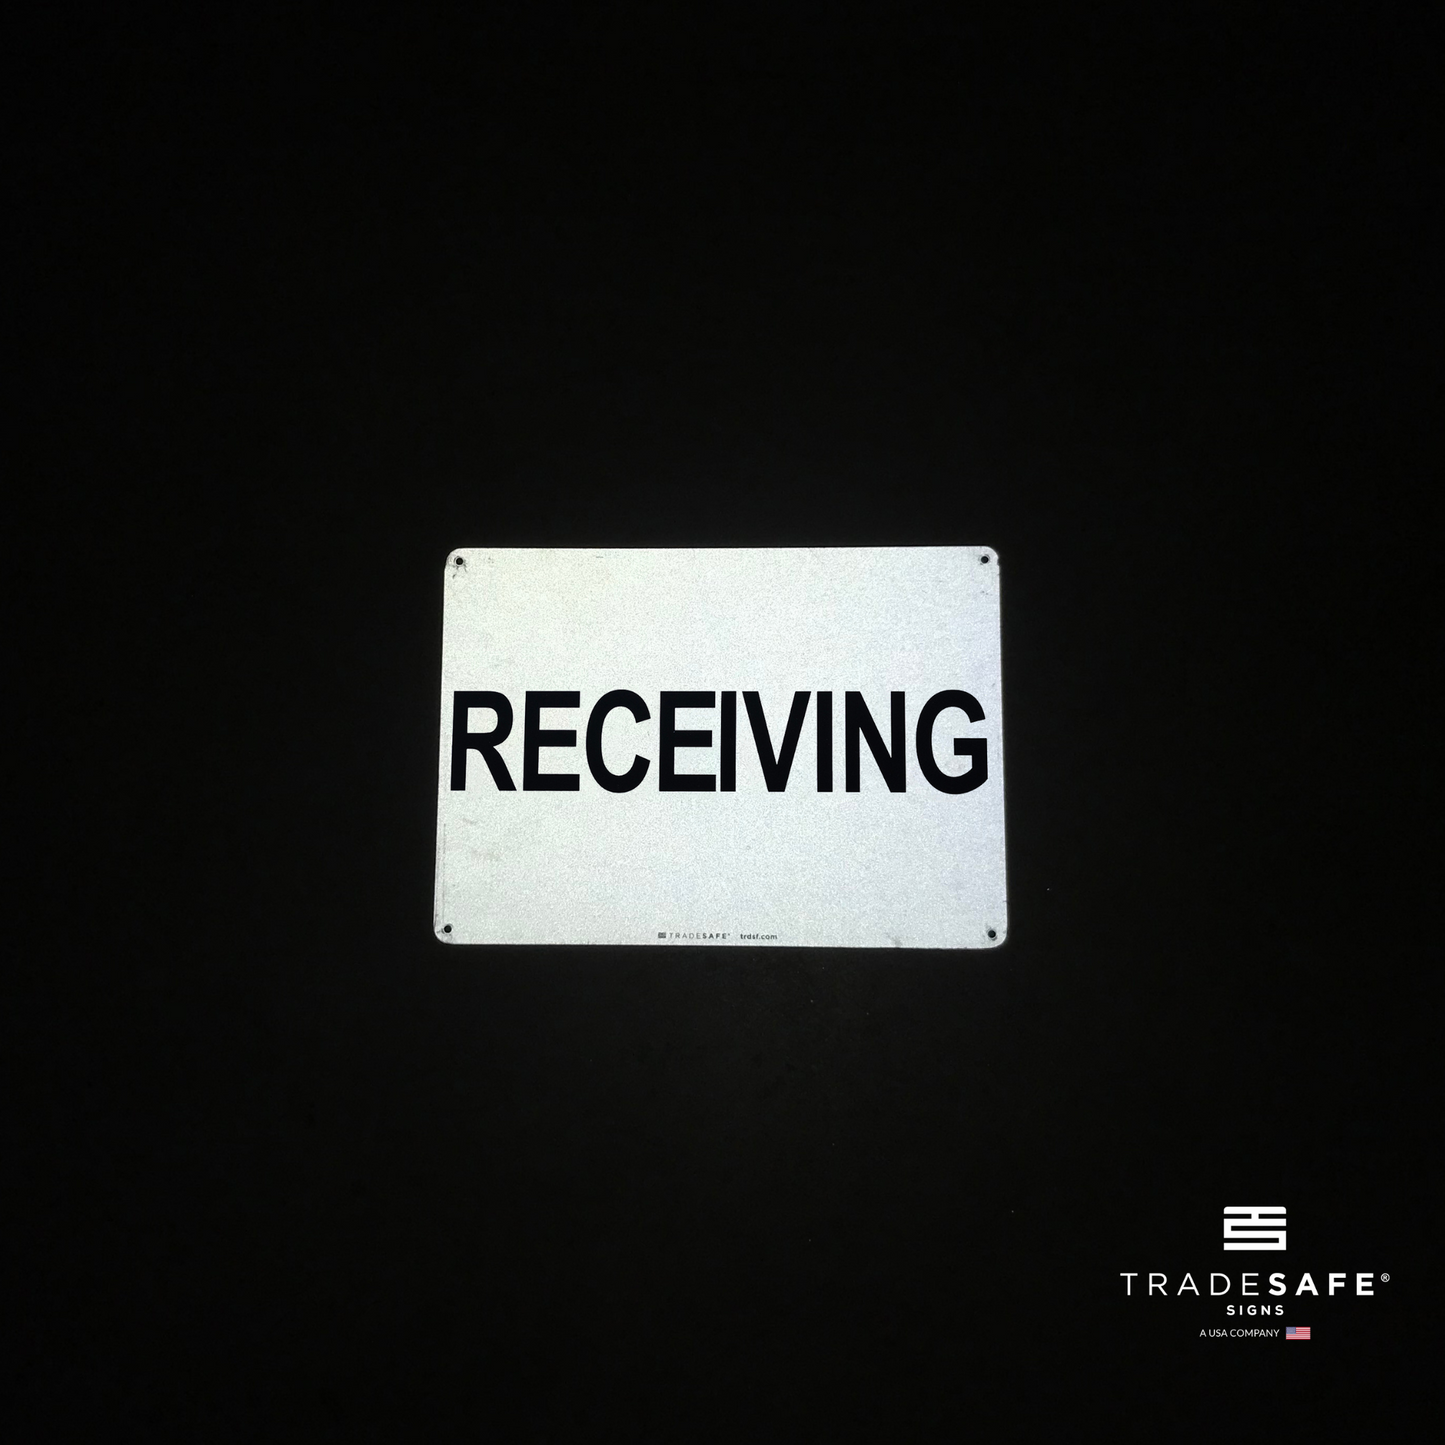 reflective attribute of receiving sign